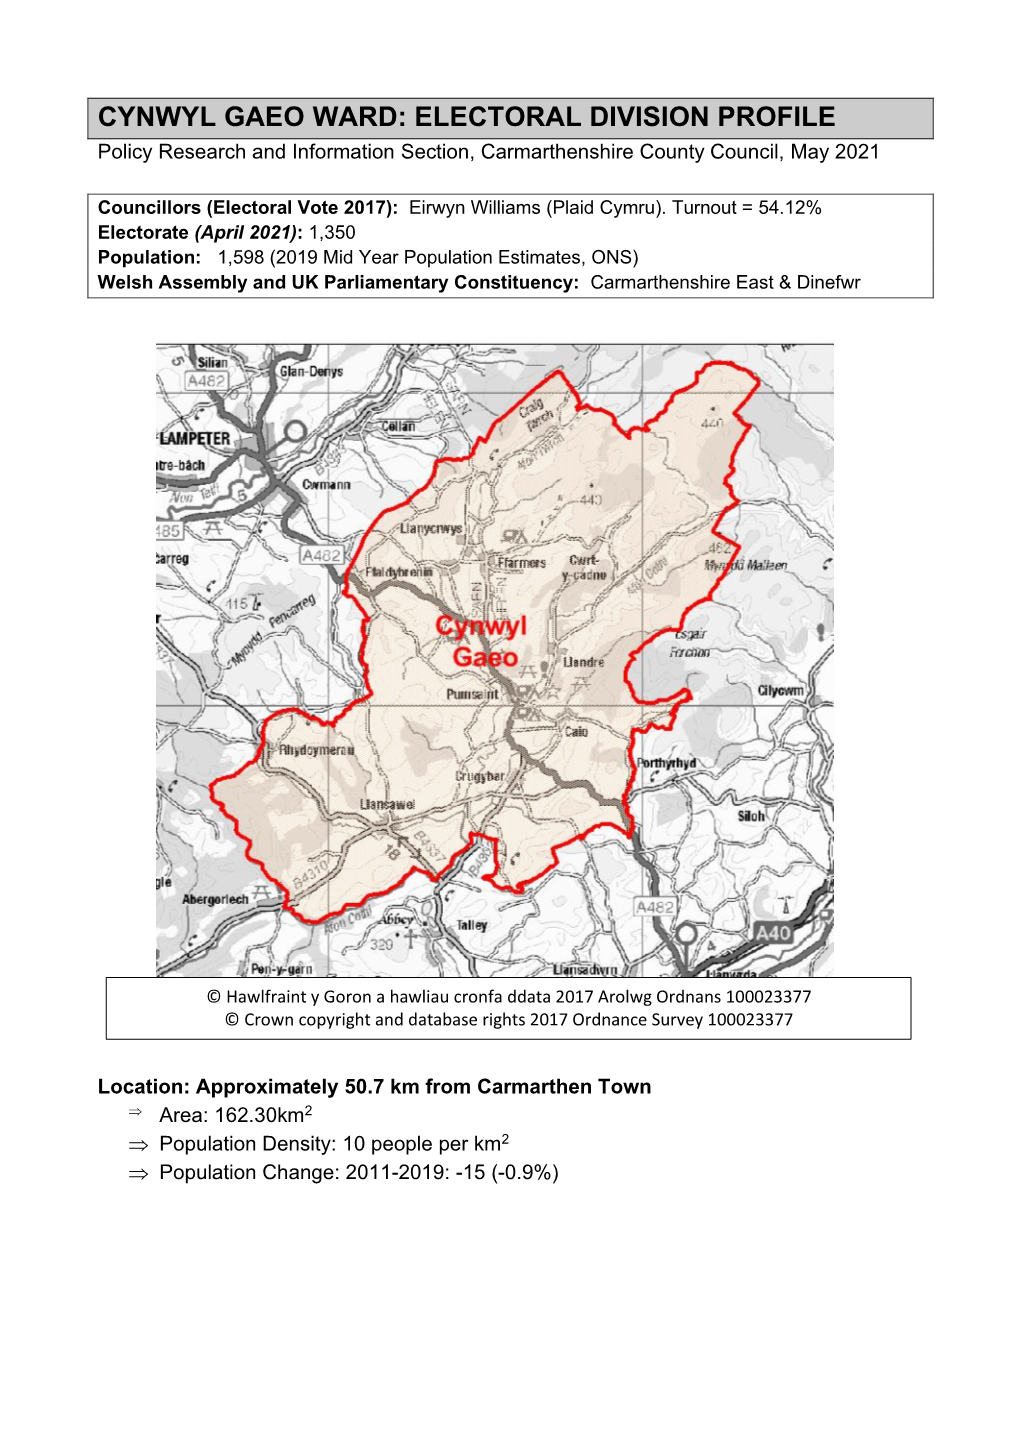 CYNWYL GAEO WARD: ELECTORAL DIVISION PROFILE Policy Research and Information Section, Carmarthenshire County Council, May 2021